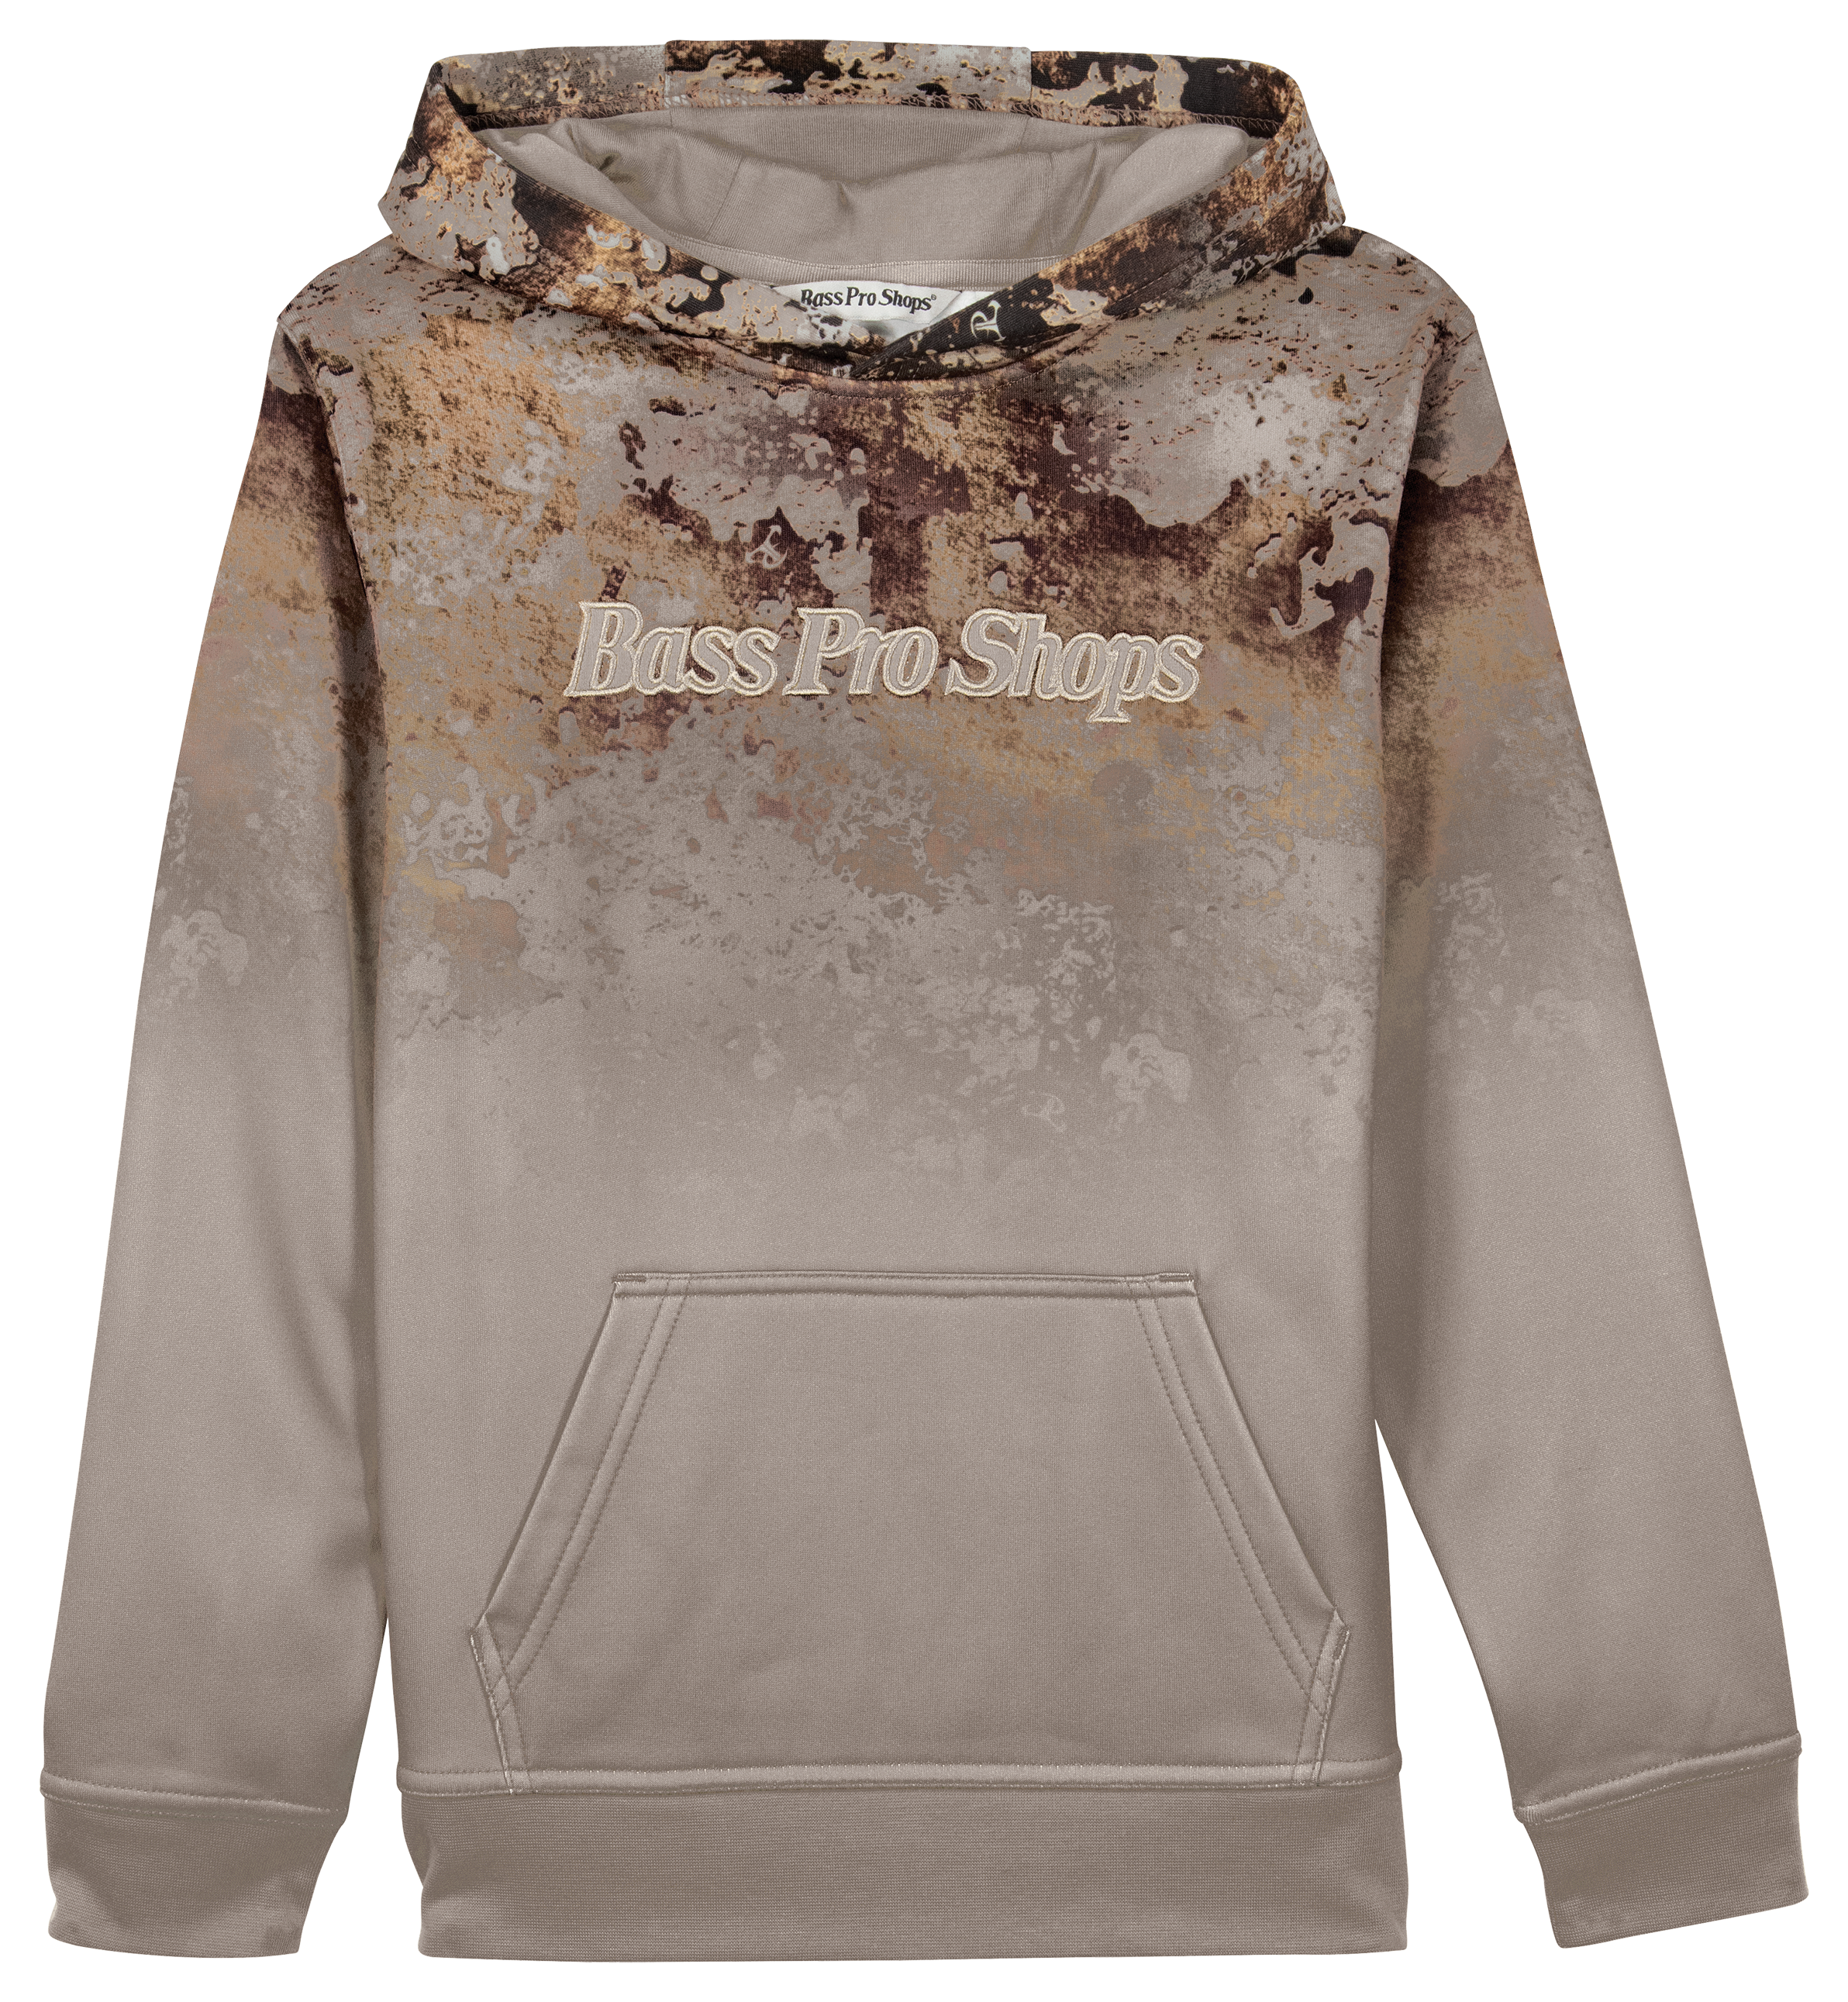 Bass Pro Shops GameDay Camo Gradient Long-Sleeve Hoodie for Youth